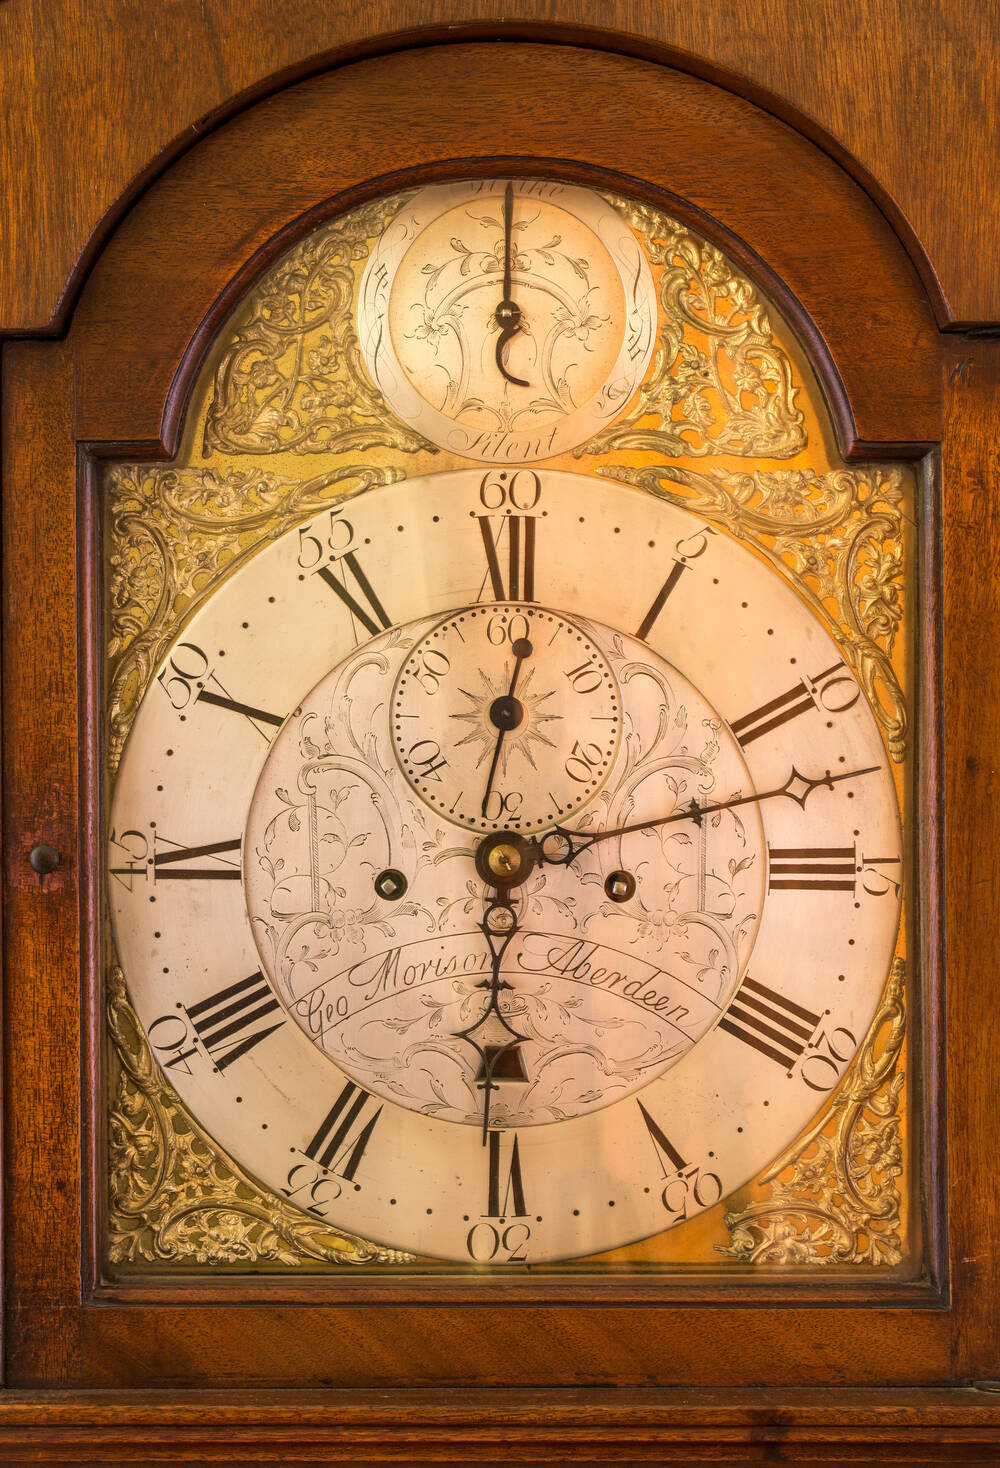 A close-up of a wooden clock’s face, engraved with the maker’s name. It has roman numerals around a white large dial, with a smaller dial above.